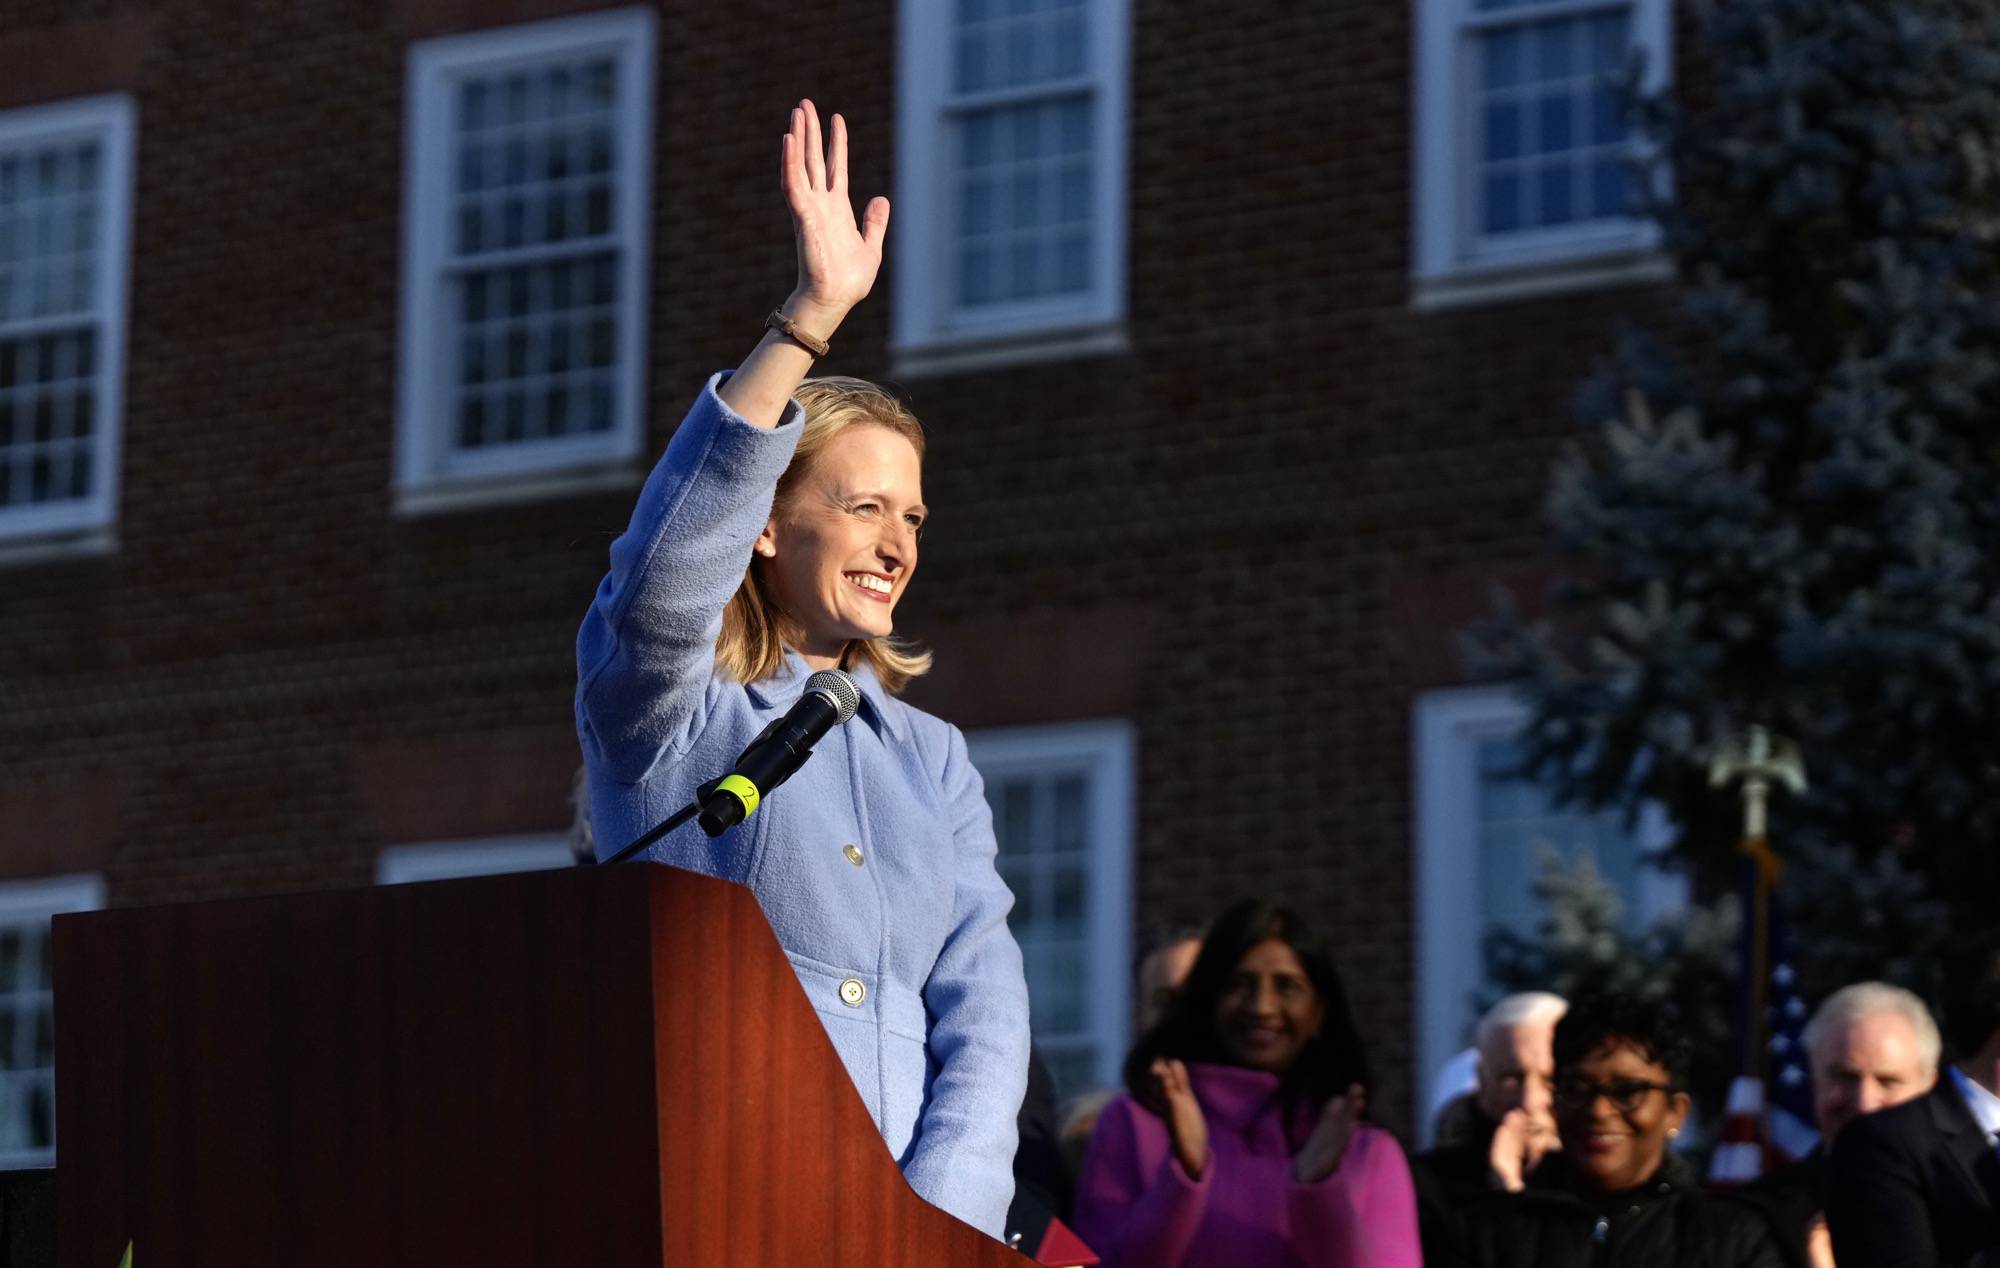 Brooke Leirman is inaugurated as the first woman Comptroller in Maryland on January 16, 2023 in Annapolis, MD.